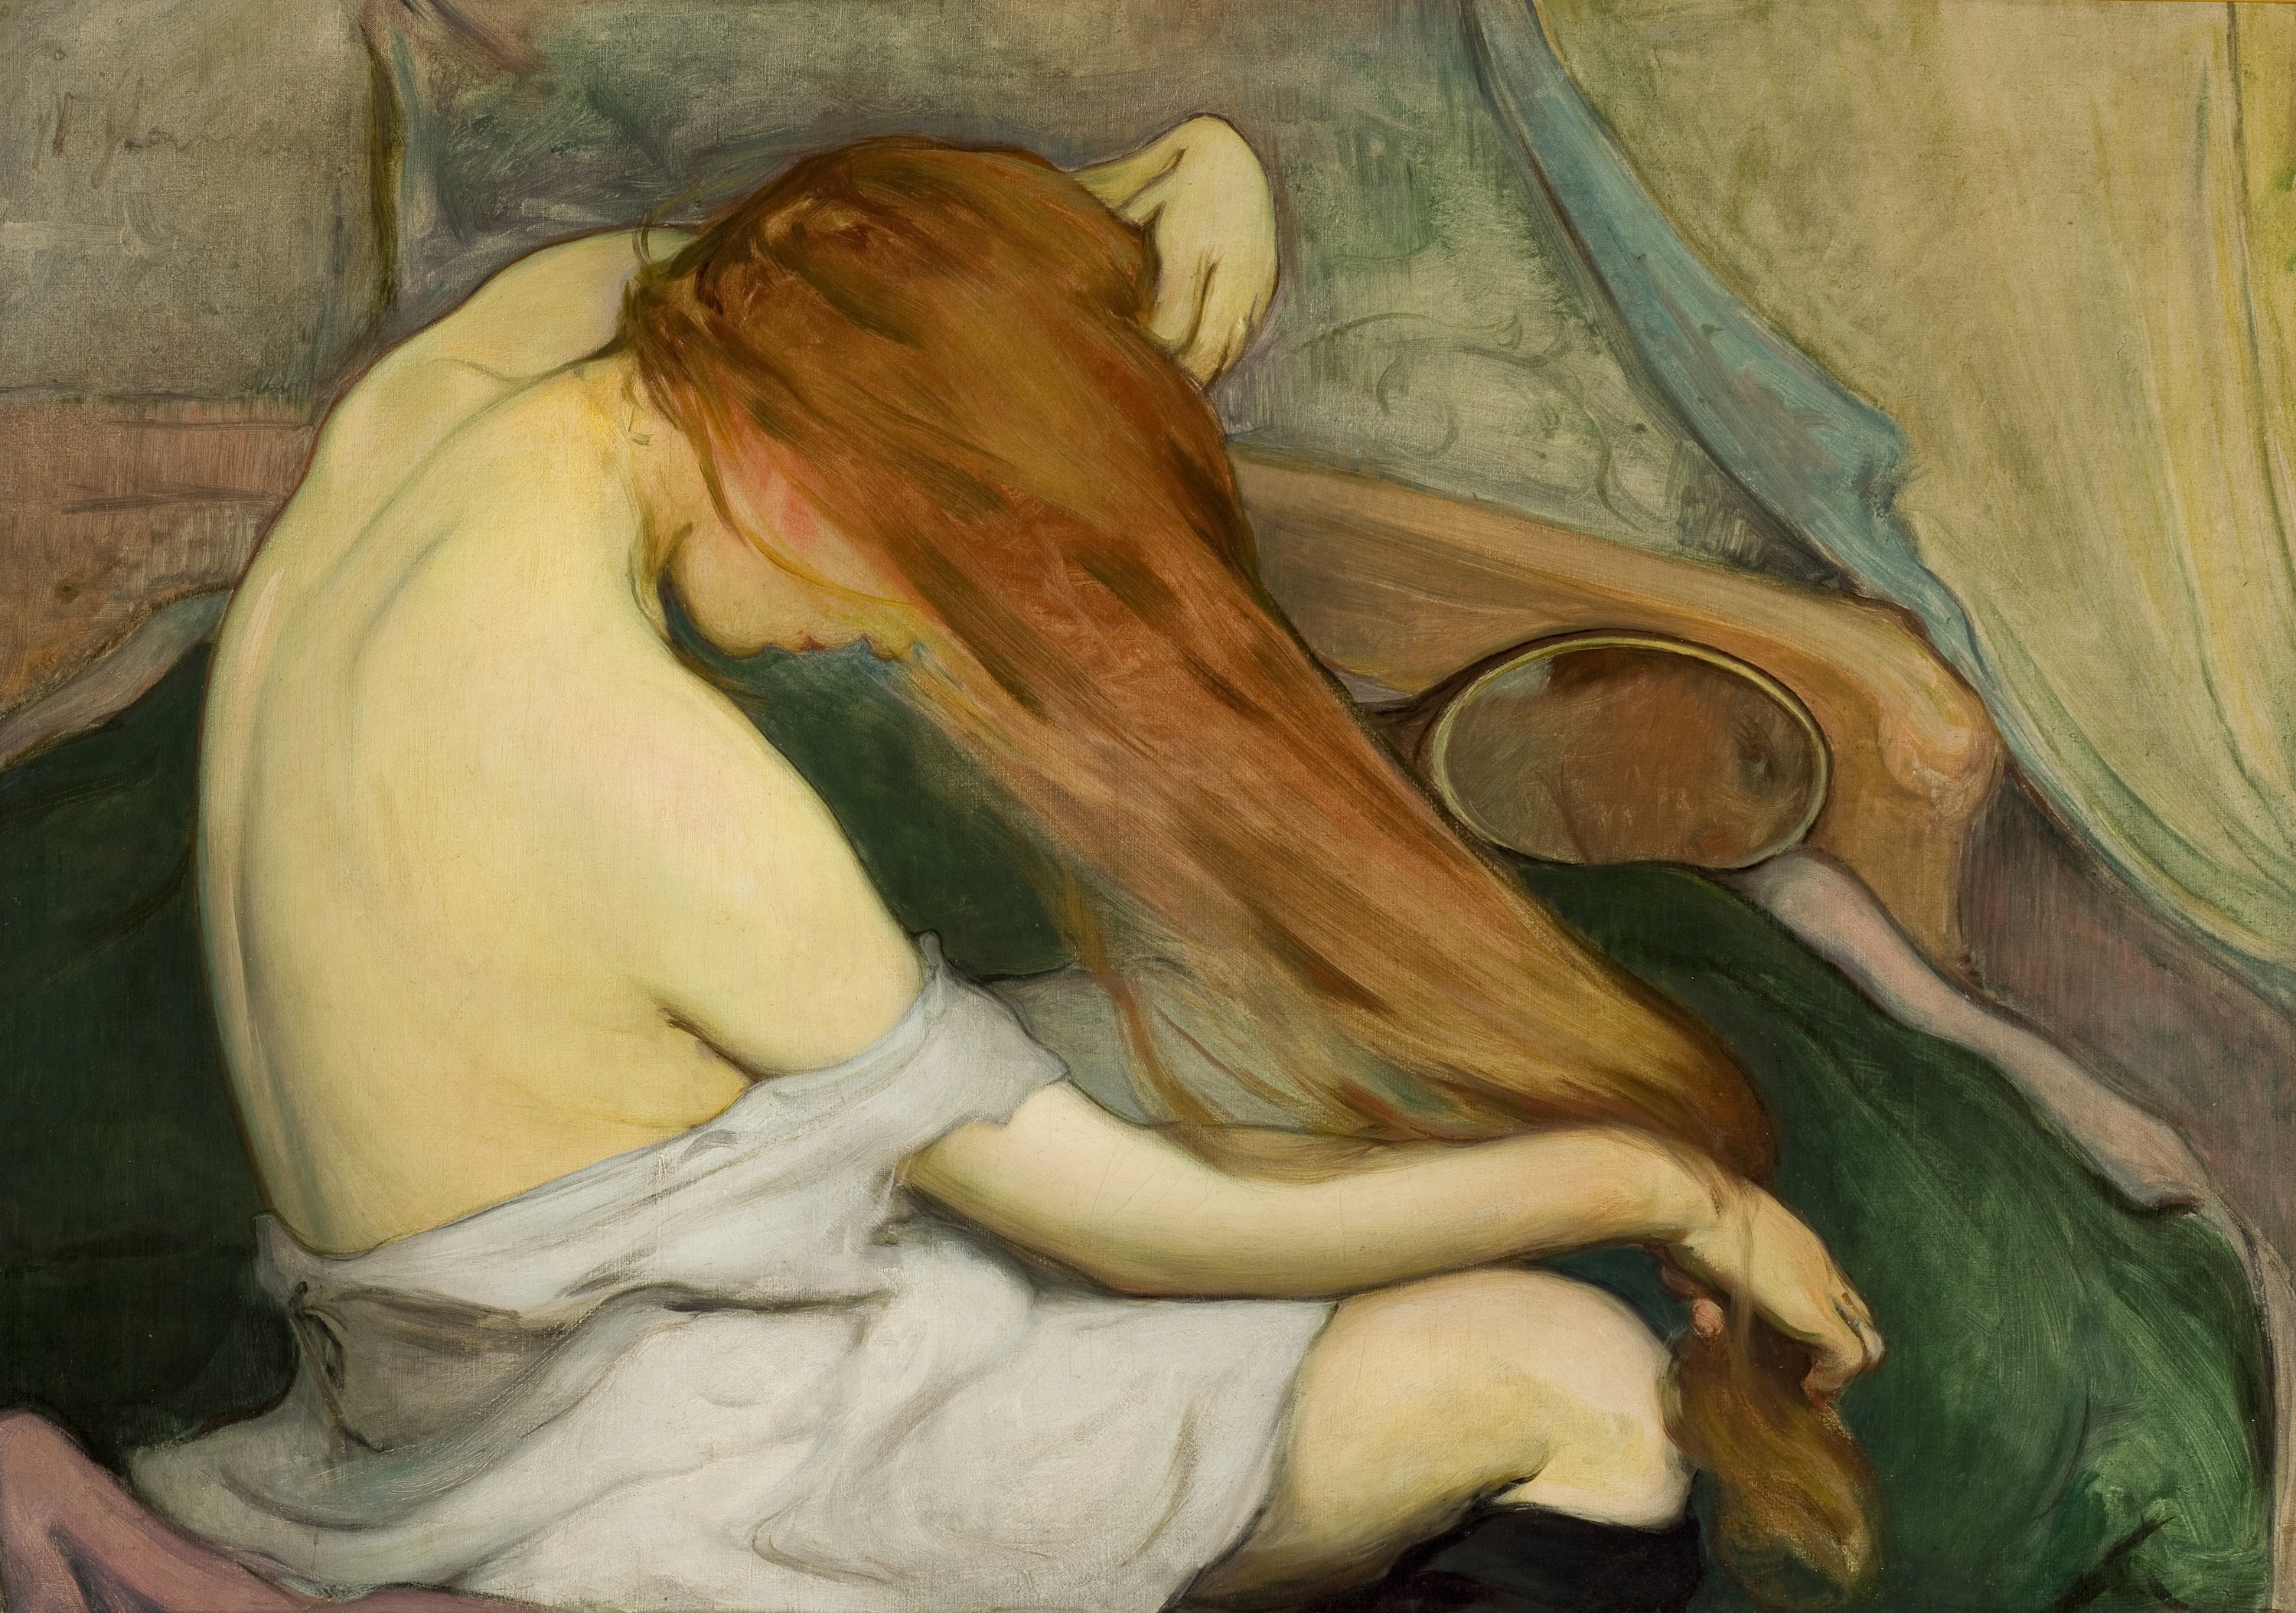 Woman Combing her Hair by Wladyslaw Slewinski - 1897 - 64 x 91 cm National Museum in Krakow